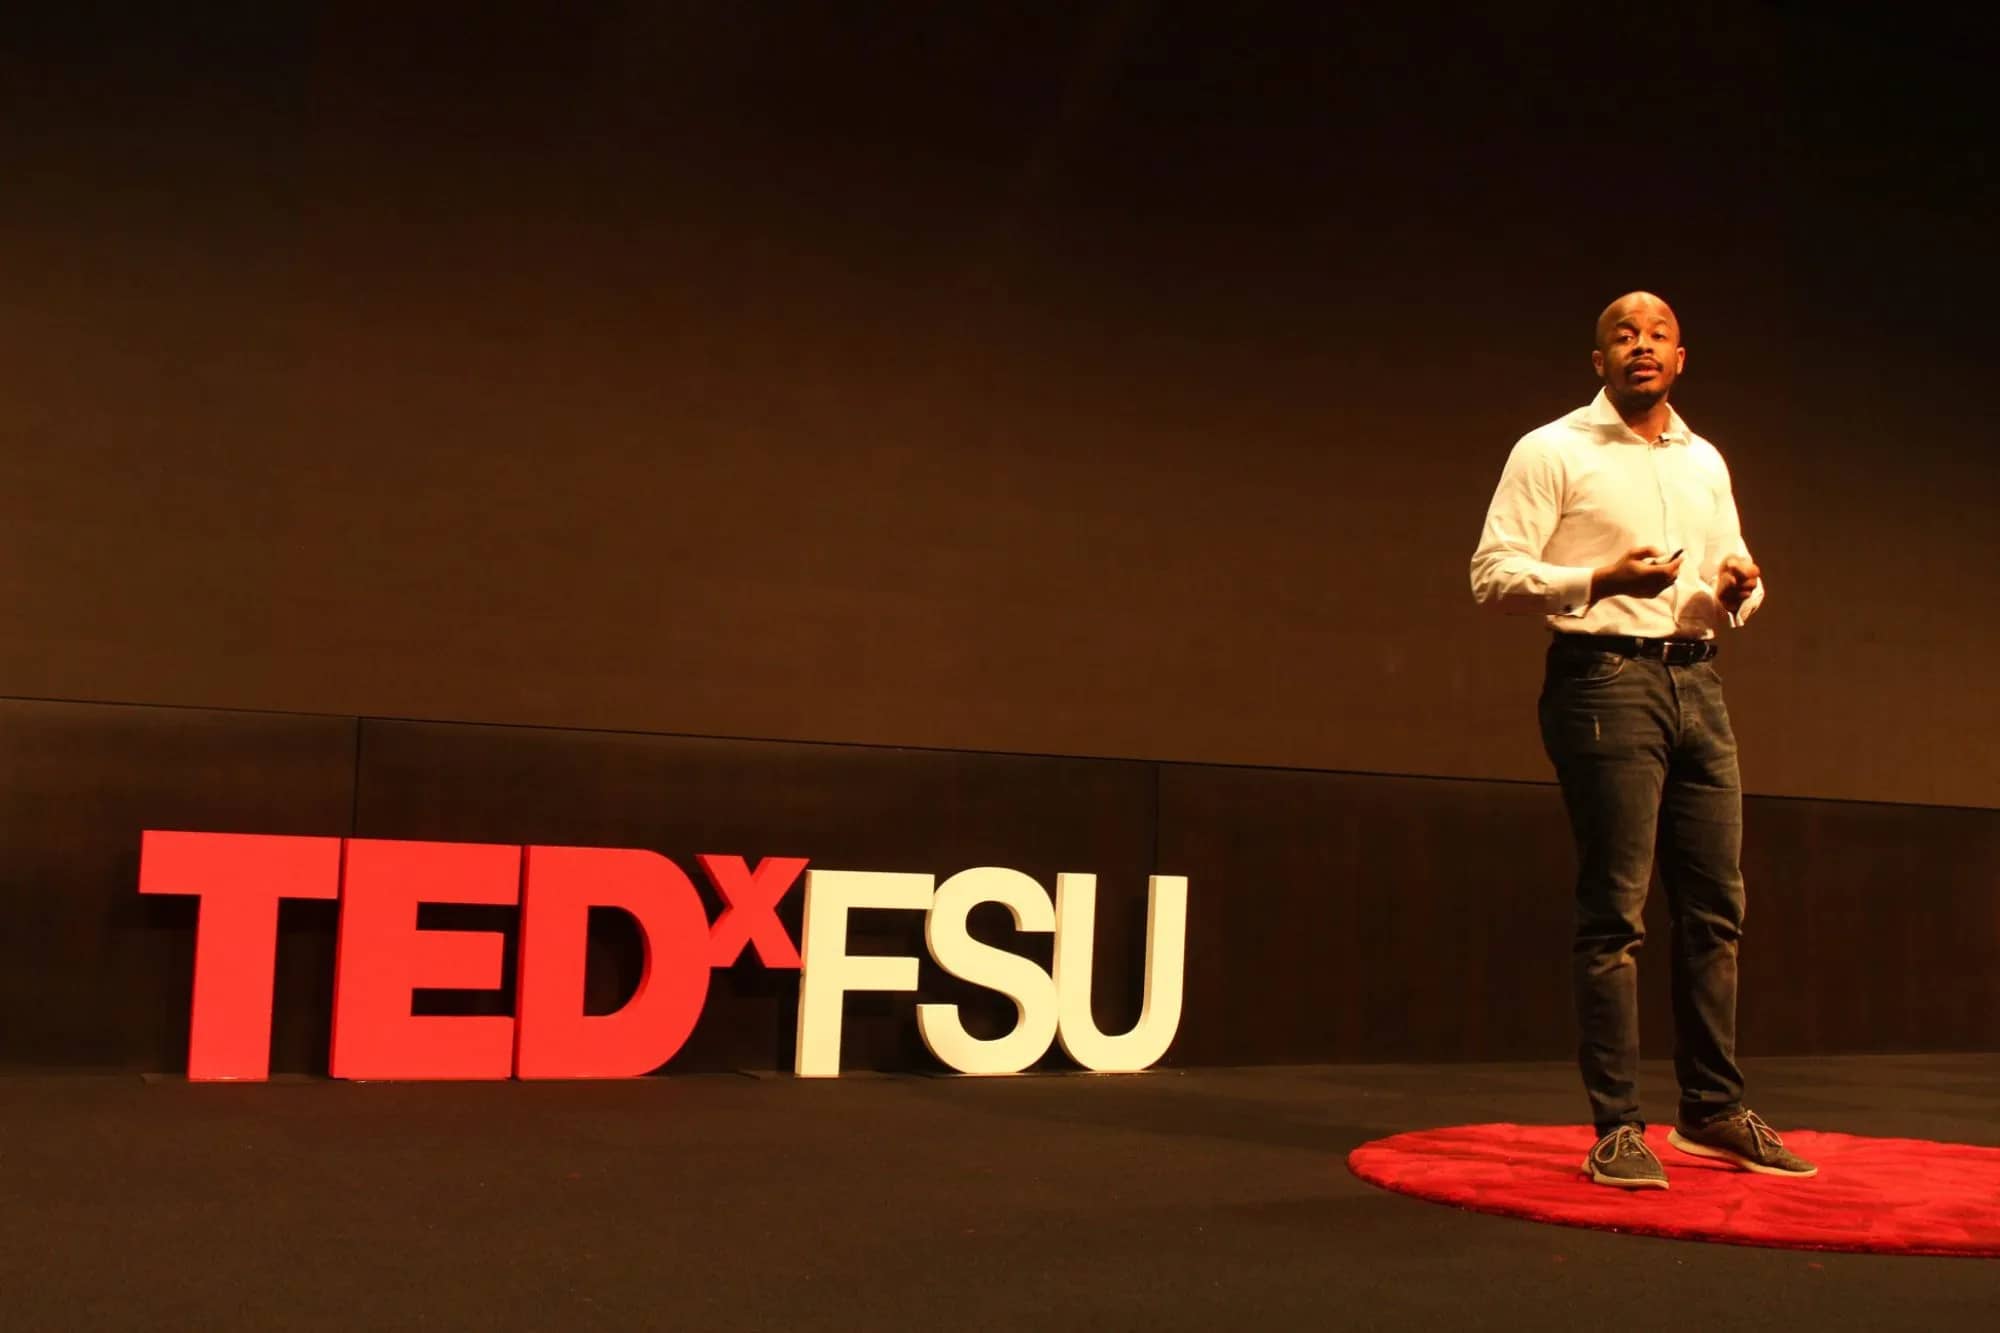 Founder Fabrice Guerrier Gives a TED Talk titled “Gone Are The Days of The Lone Genius”